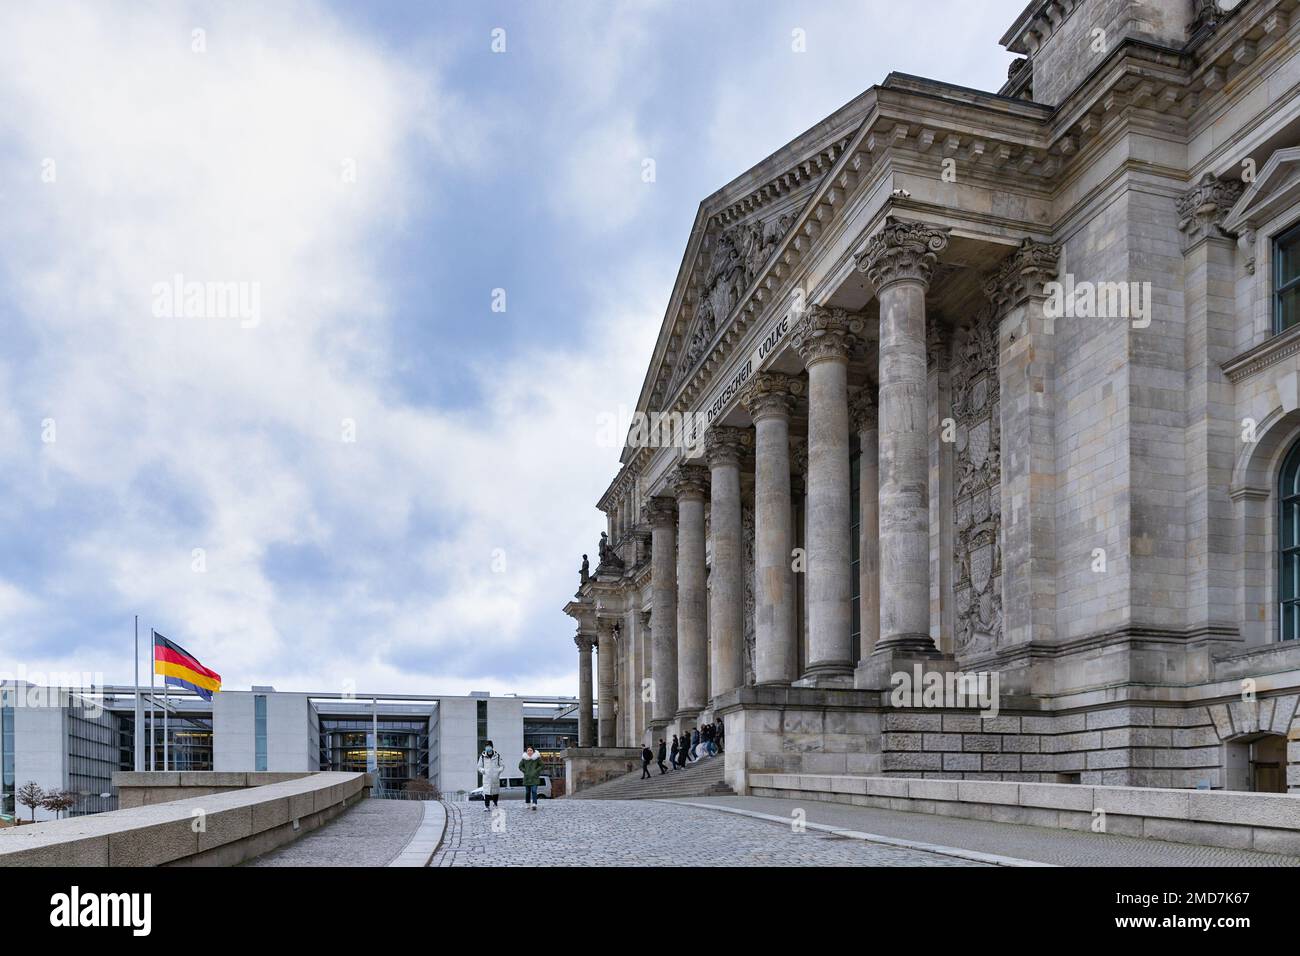 In front of the Bundestag building. The German federal parliament. Visitors and excursions to the Bundestag in Berlin, Germany Stock Photo